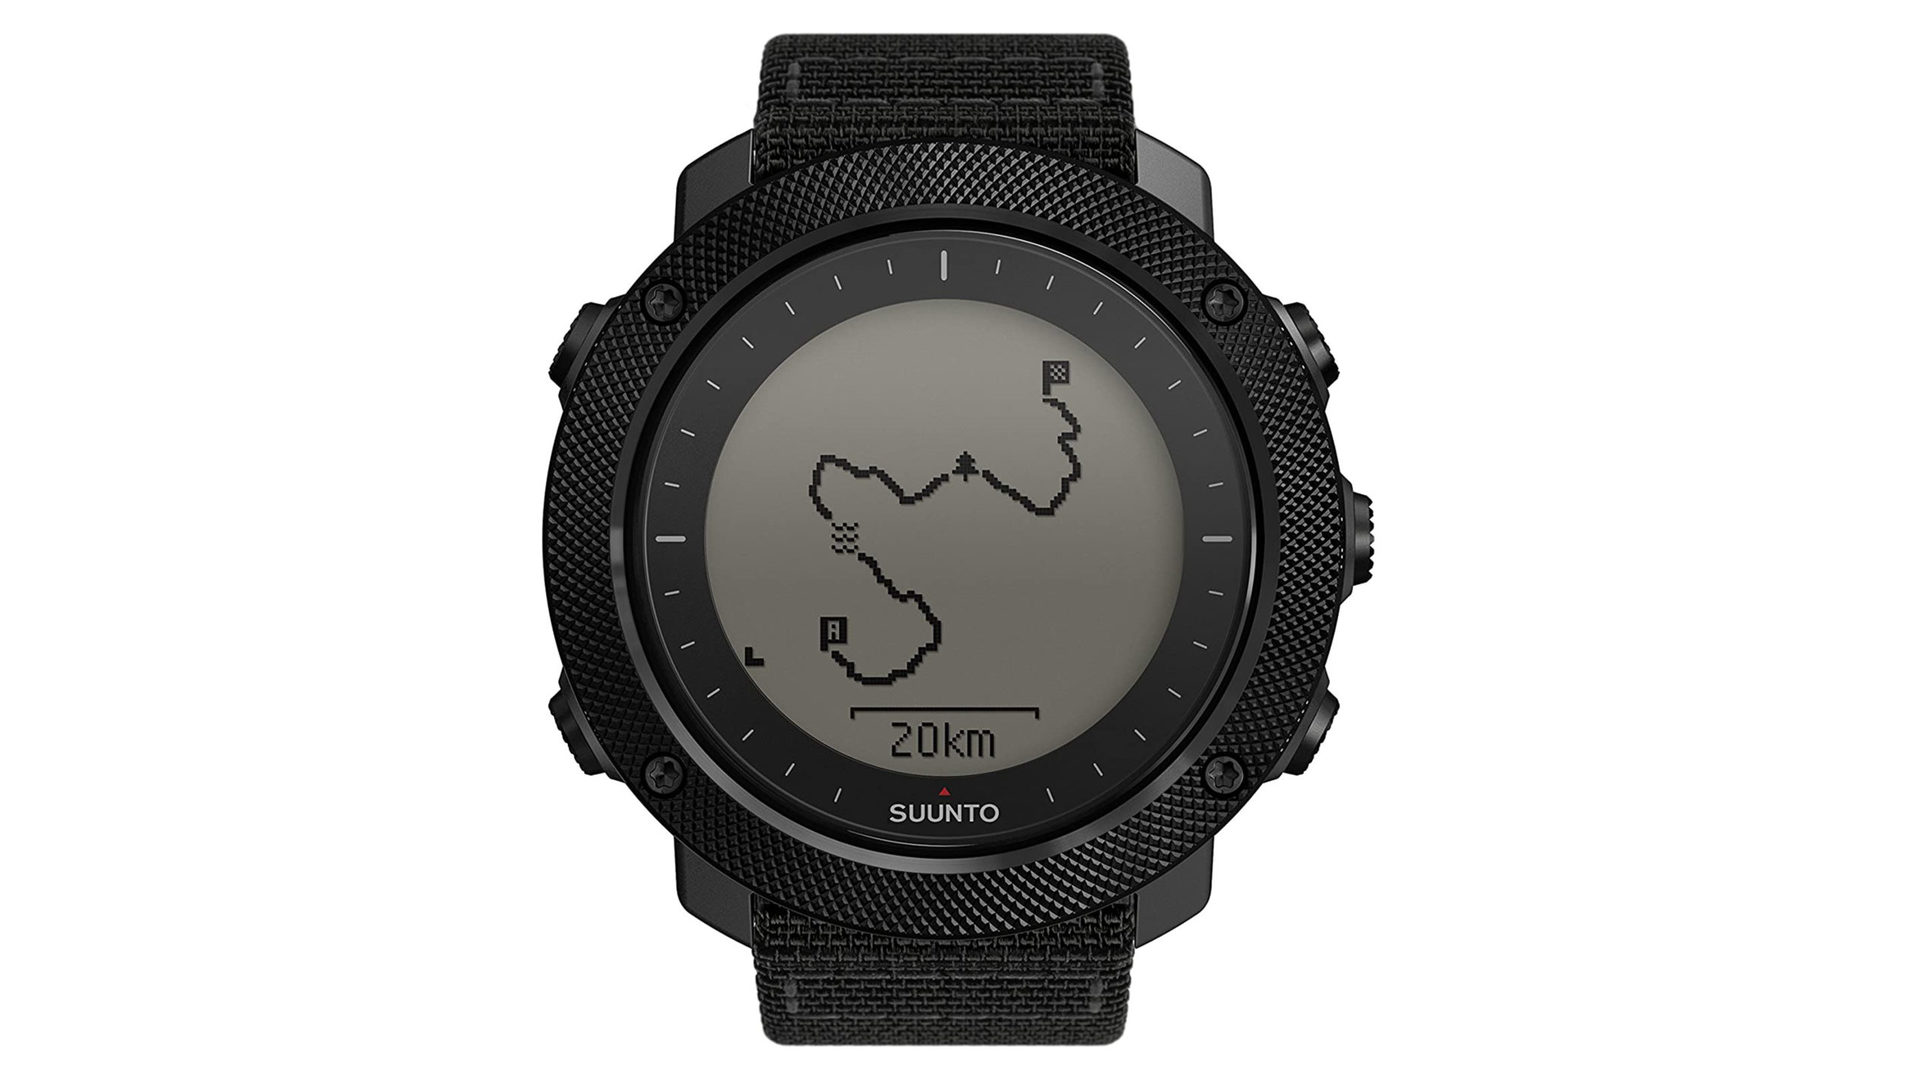 A product image of Suunto Traverse Alpha in black represents the best tactical smartwatch by Suunto.